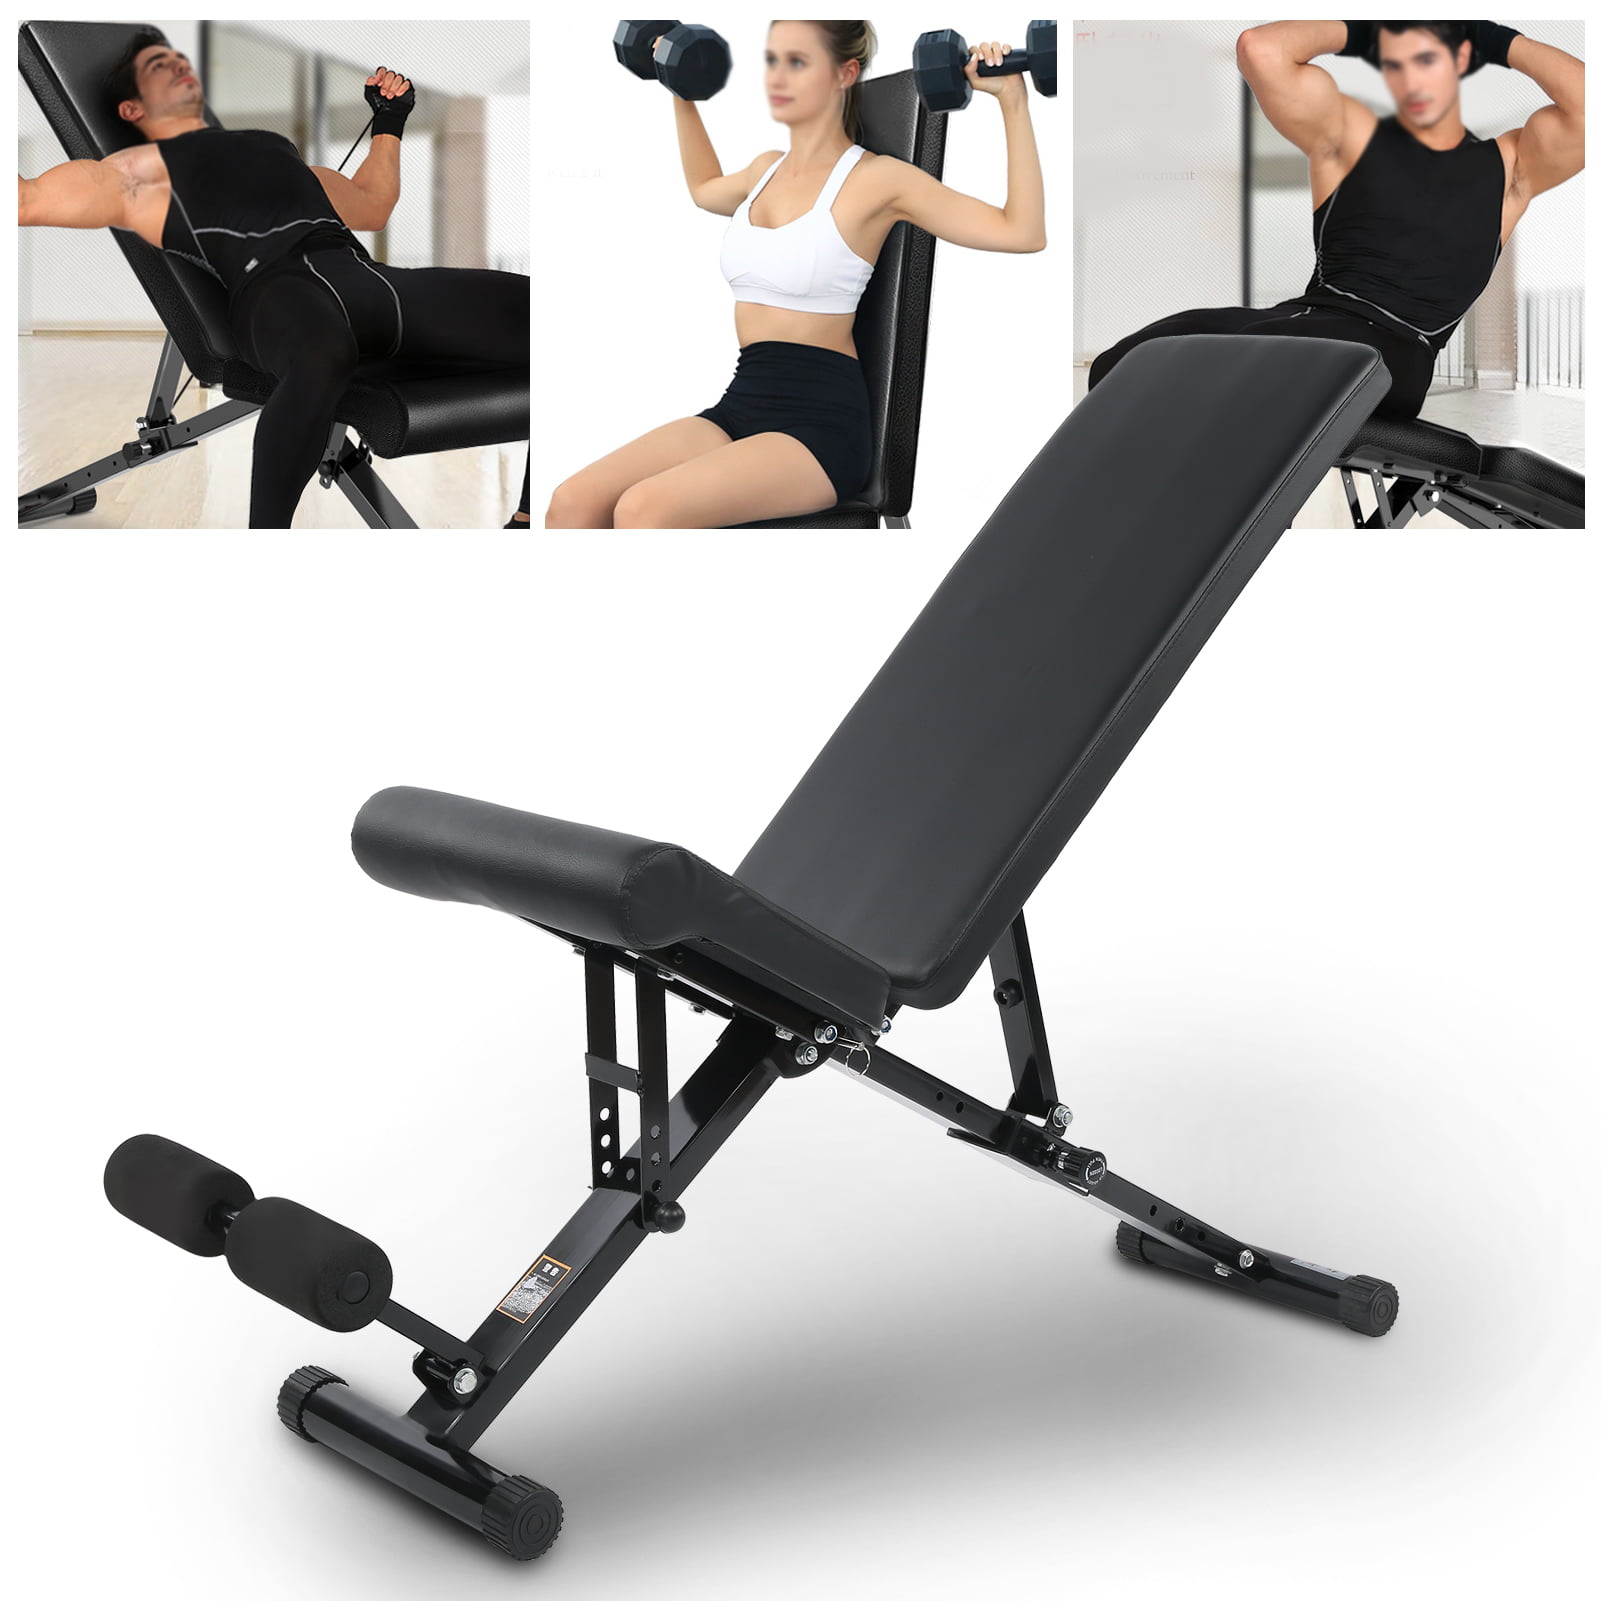 Adjustable Fitness Weight Bench For Full Body Training Home Gym Workout Indoor 